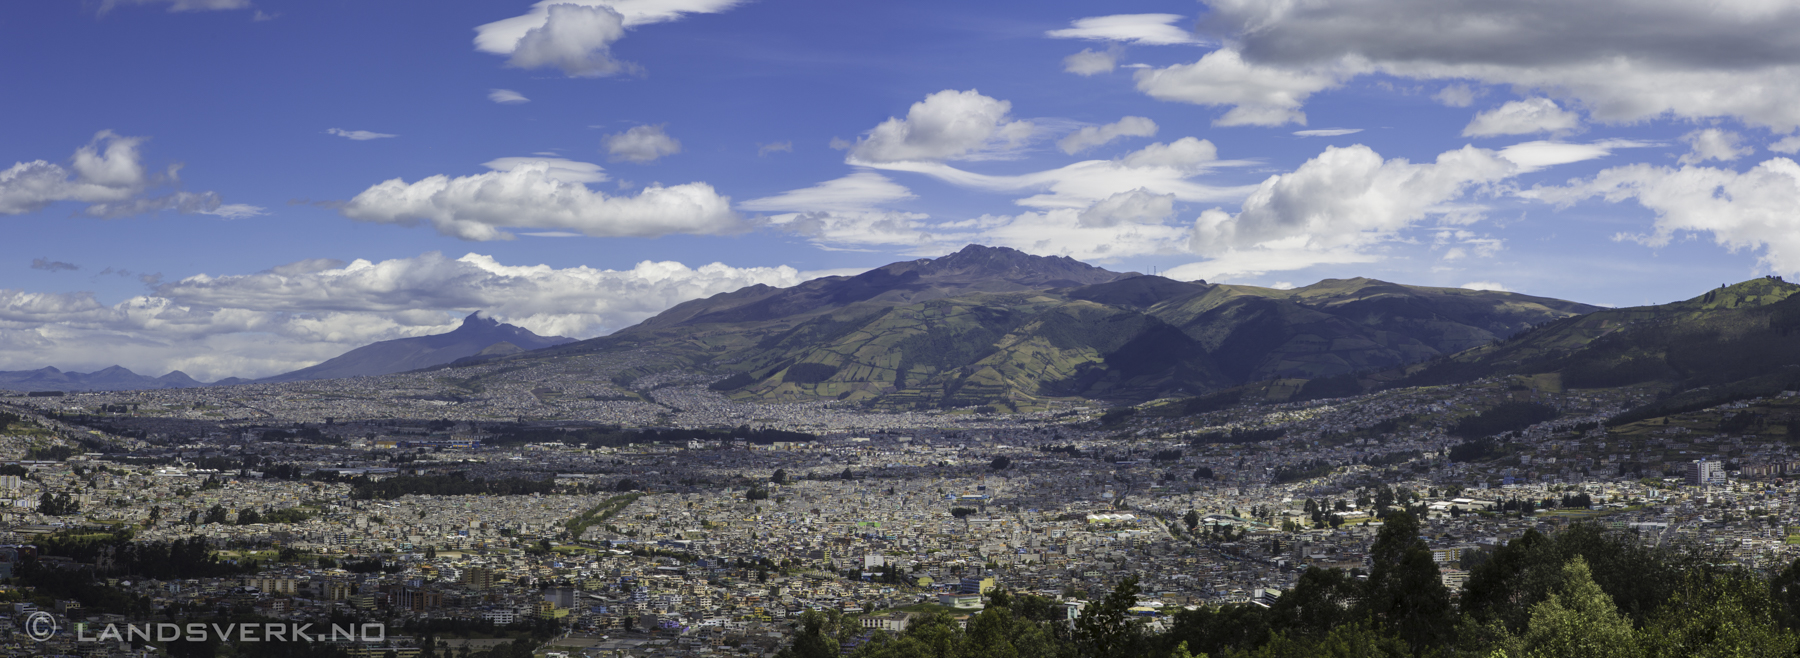 Outer parts of Quito with Kotopaxi (volcano) in the background, Ecuador. 

(Canon EOS 5D Mark III / Canon EF 24-70mm f/2.8 L USM)